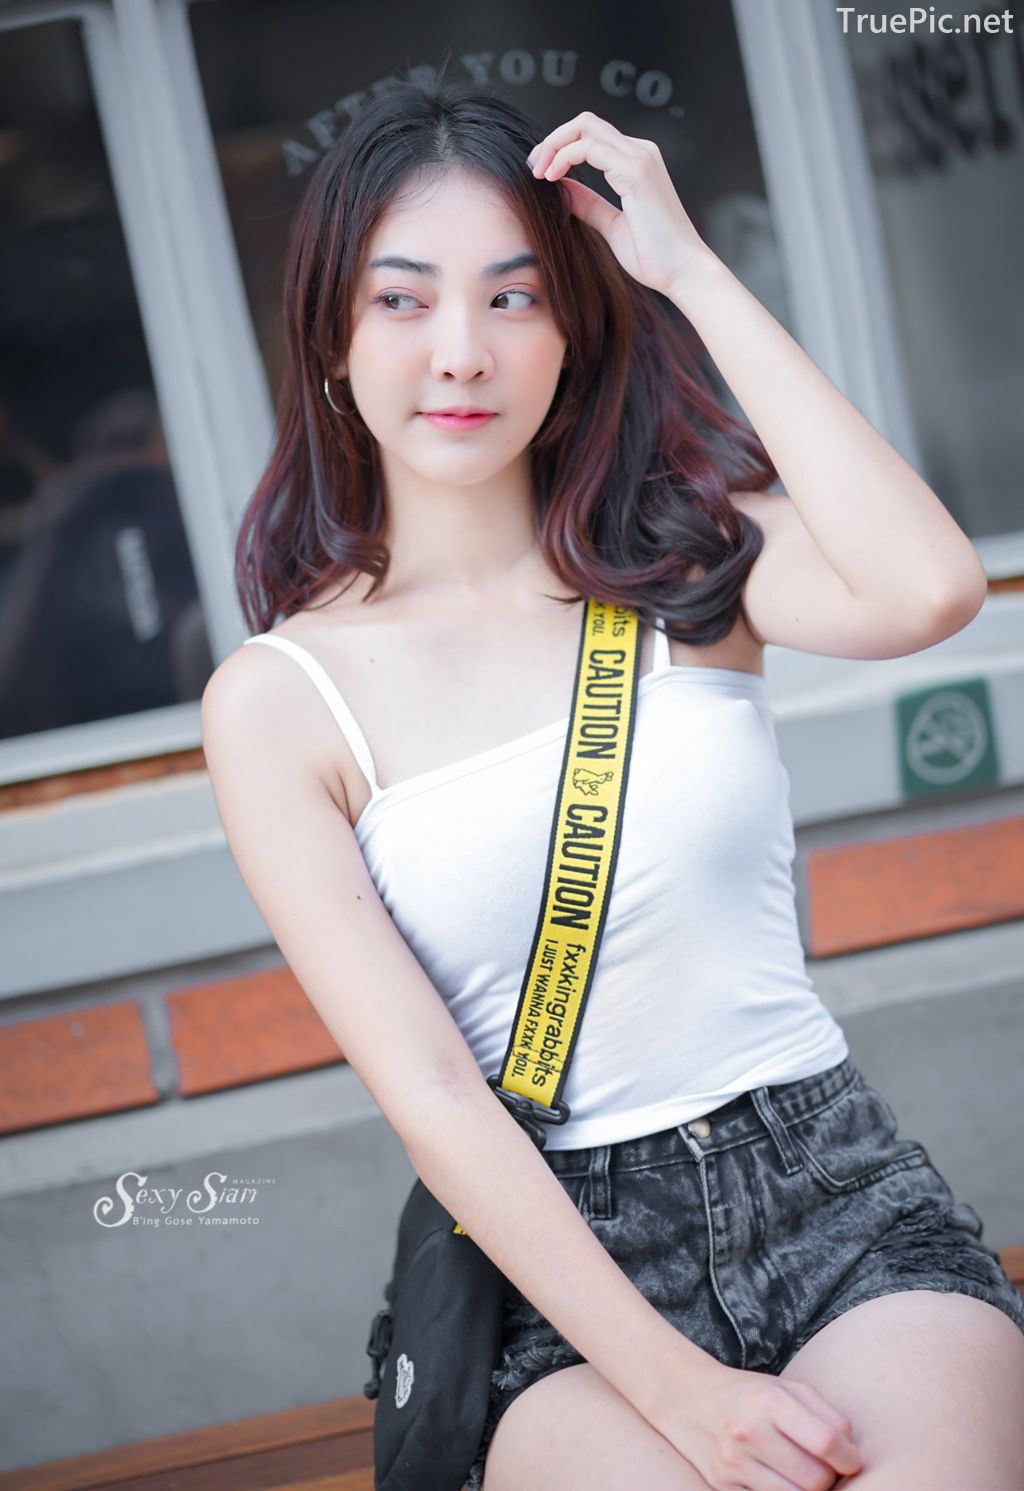 Thailand beautifil girl - Wannapon Thongkayai - The Angel on the City Street - TruePic.net - Picture 17